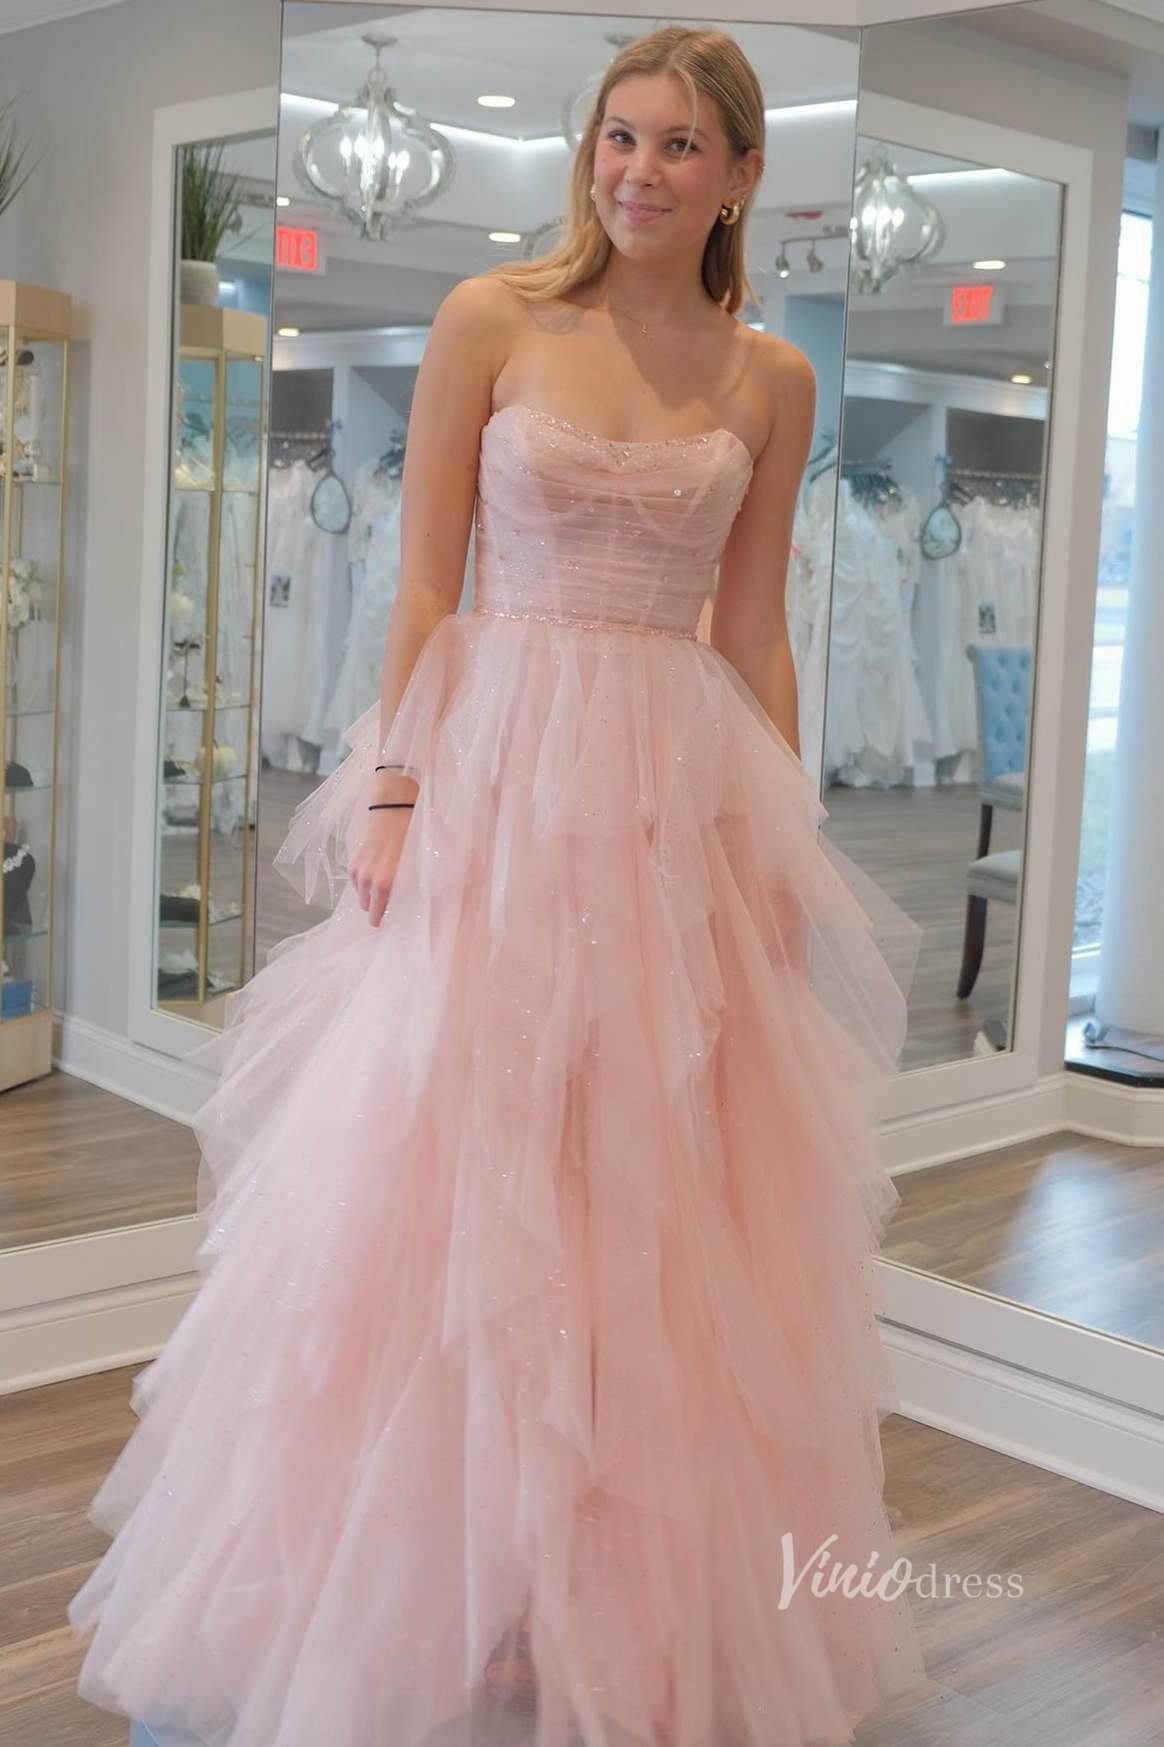 Sparkly Blush Pink Tiered Prom Dresses Strapless Pleated Boned Bodice FD4035